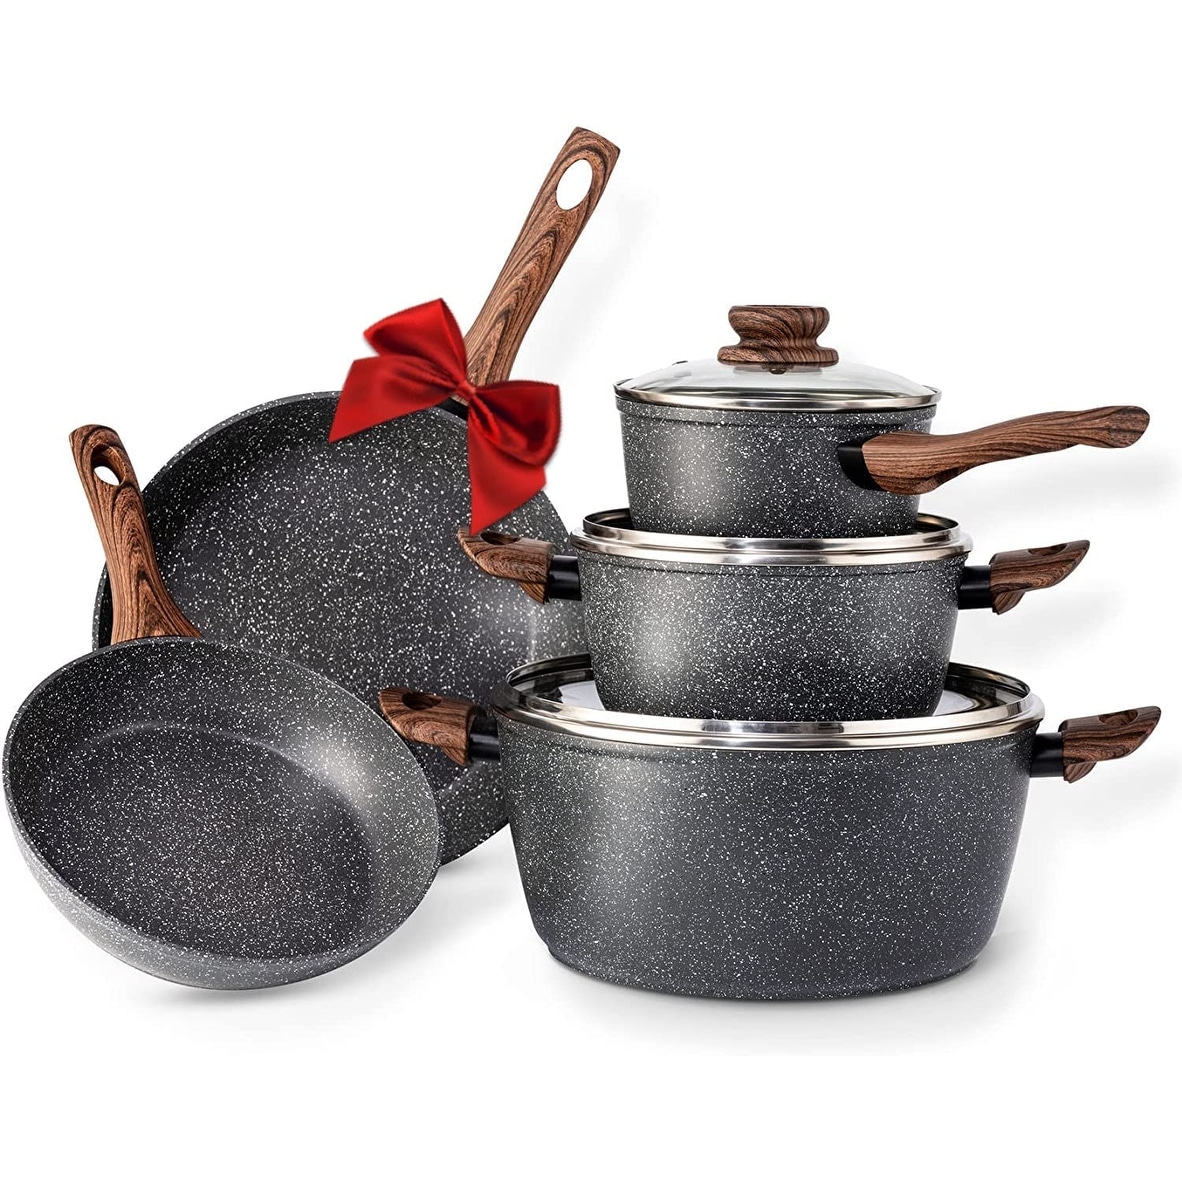 https://ak1.ostkcdn.com/images/products/is/images/direct/38f16379484bc974607d6a462e5015cfb7137156/Induction-Cookware-Set%2C-Non-Stick-Granite-Pots-and-Pans-Set-for-Stove%2C-8-Pieces%2CDishwasher-Safe.jpg